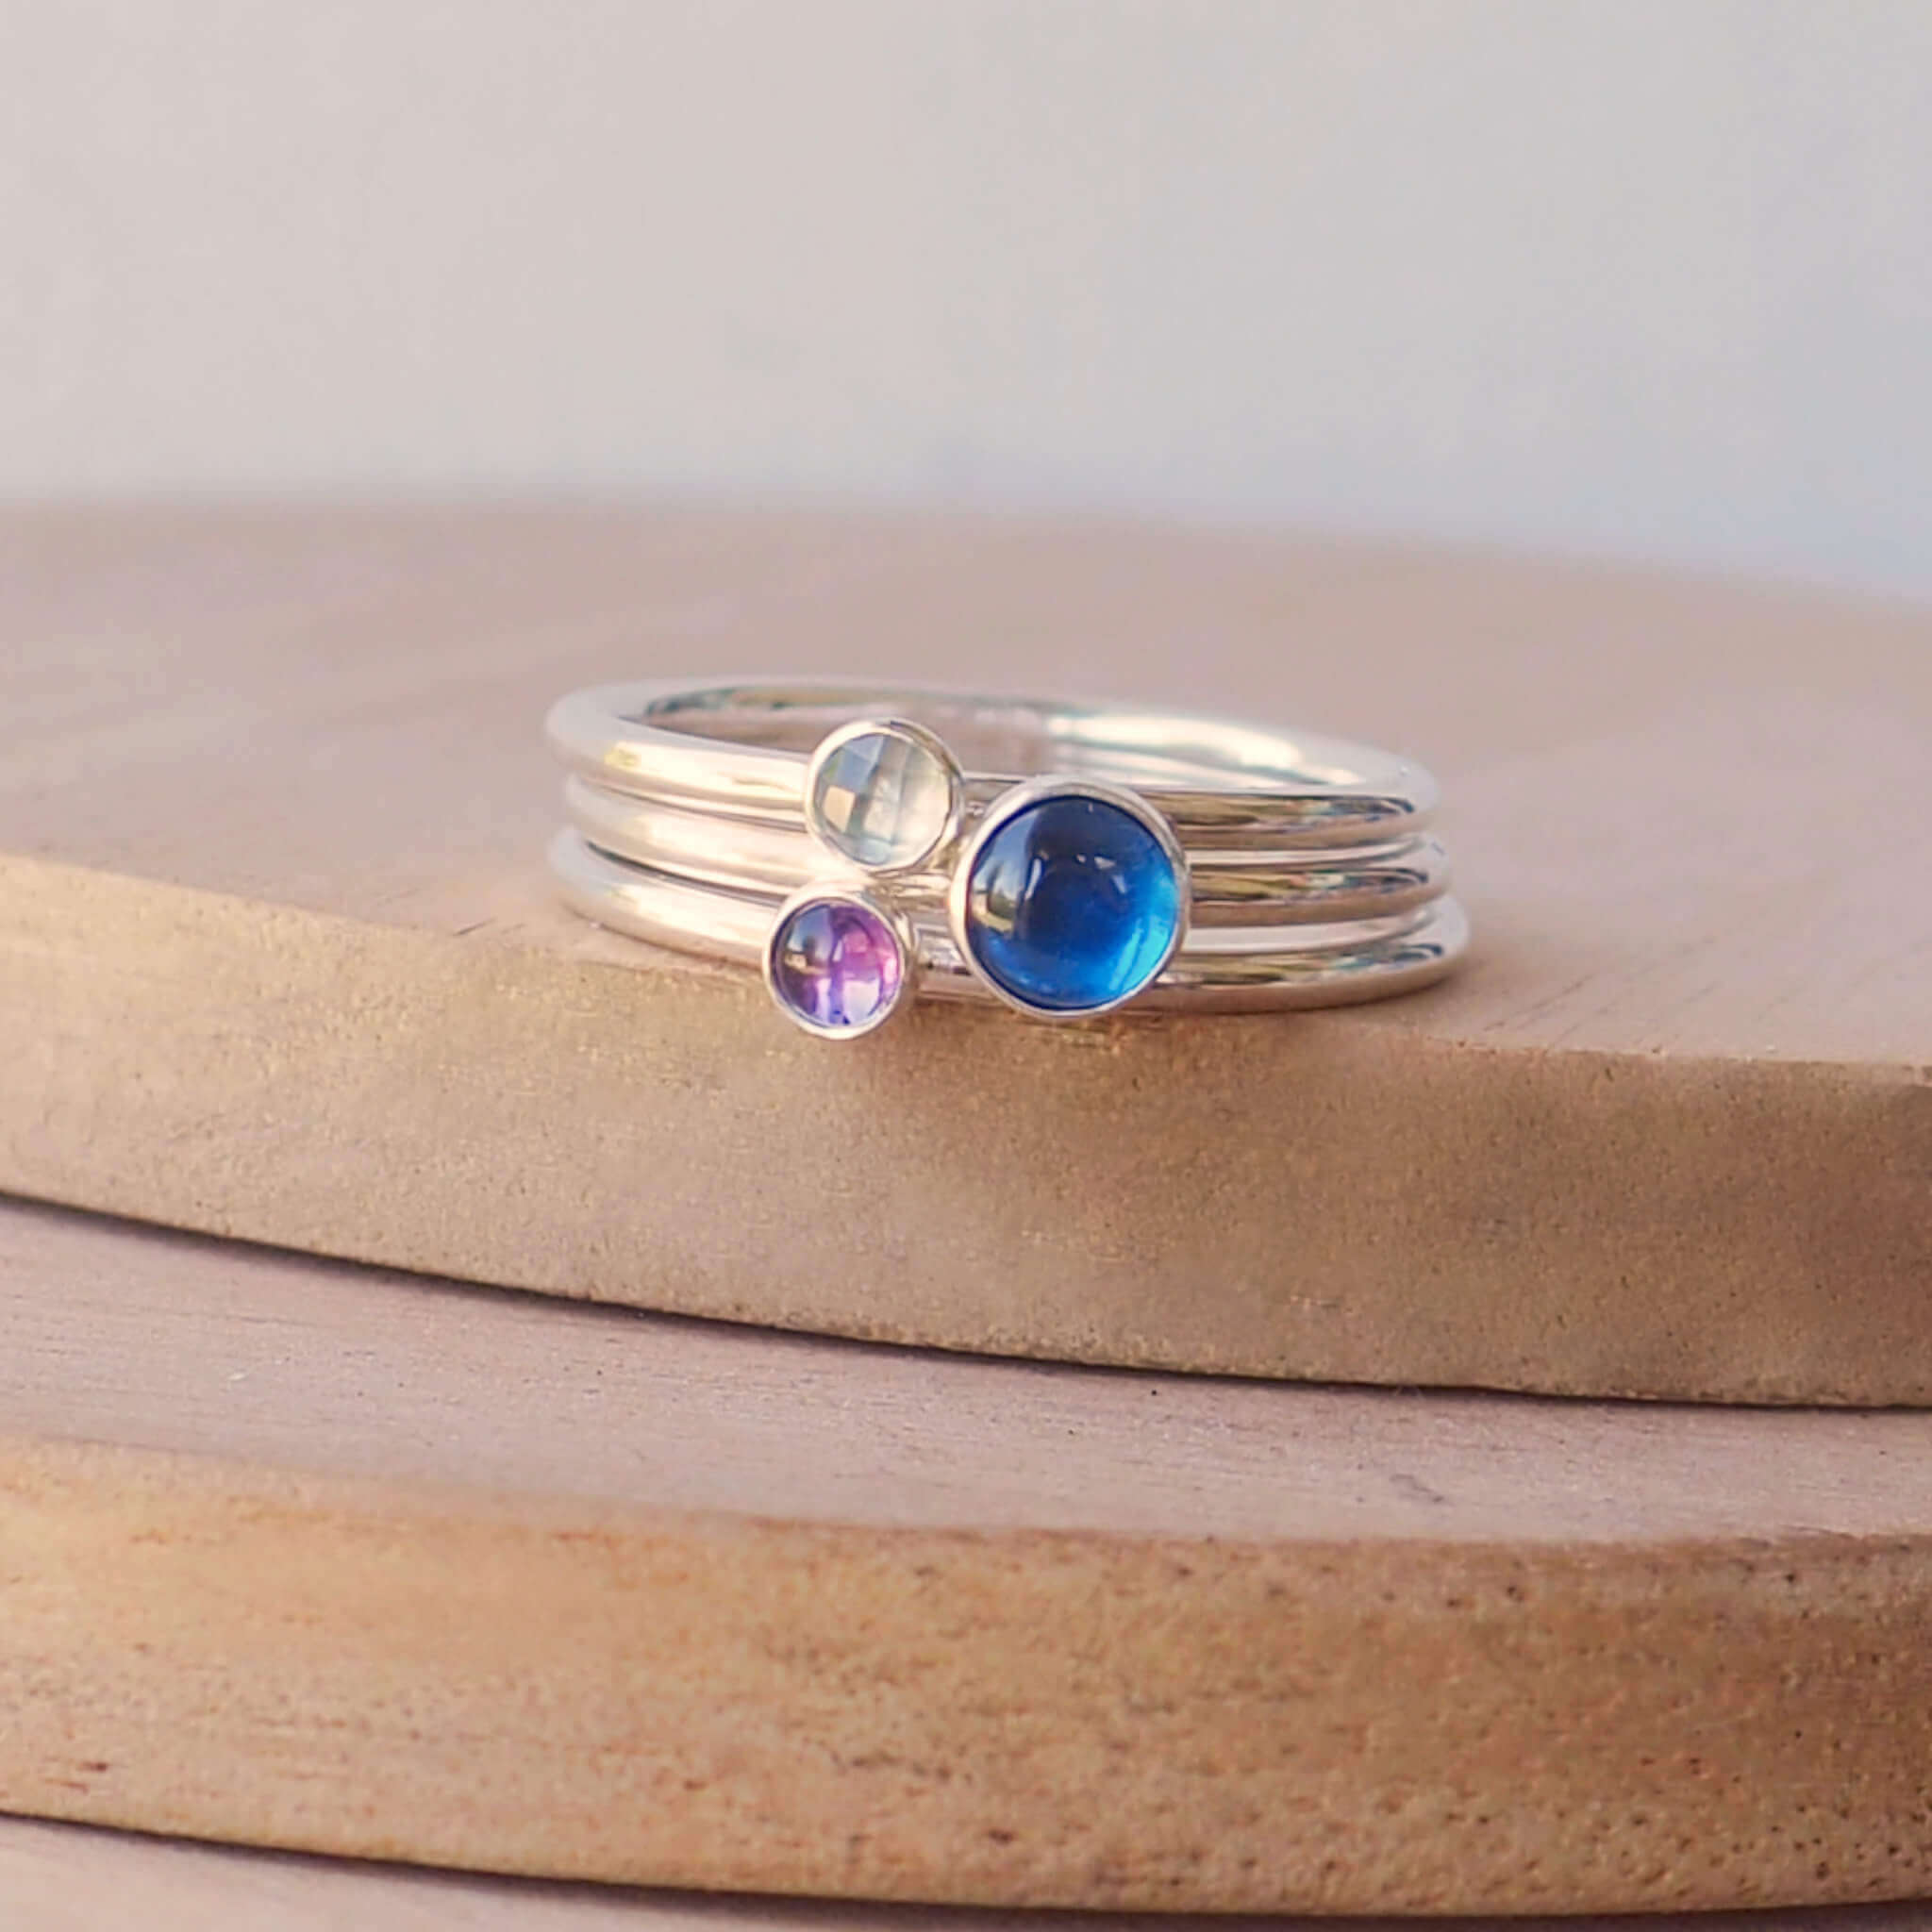 family birthstone rings with a large blue sapphire, smaller purple amethyst and a light blue Topaz, all in sterling silver.Handmade by maram jewellery in Edinburgh